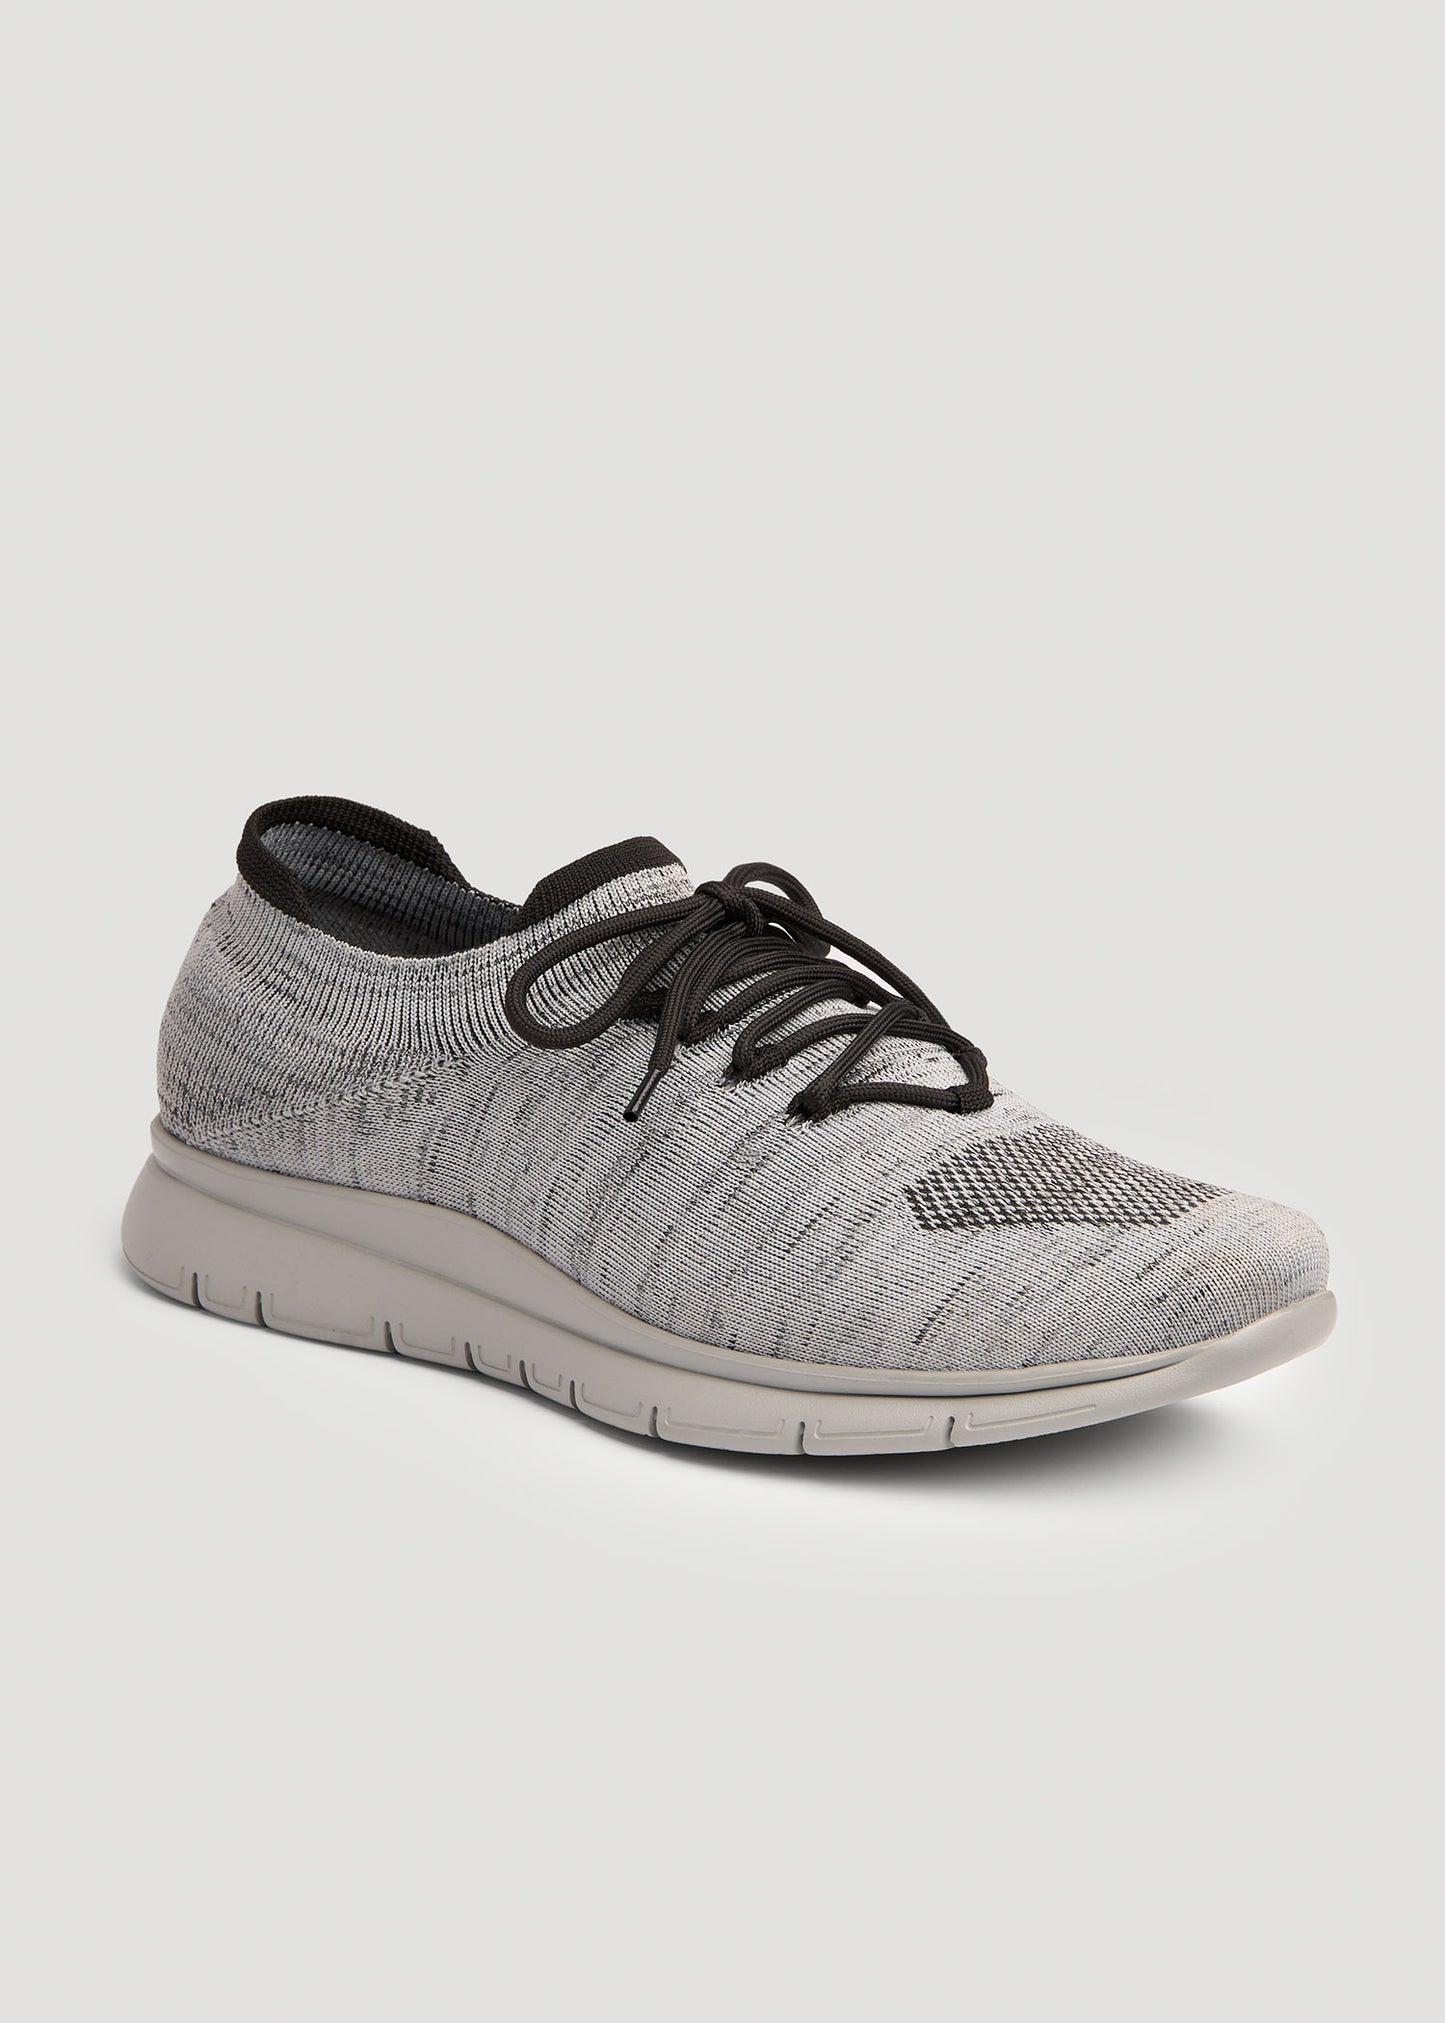 Tall Men's Knit Running Shoes in Grey Mix by American Tall